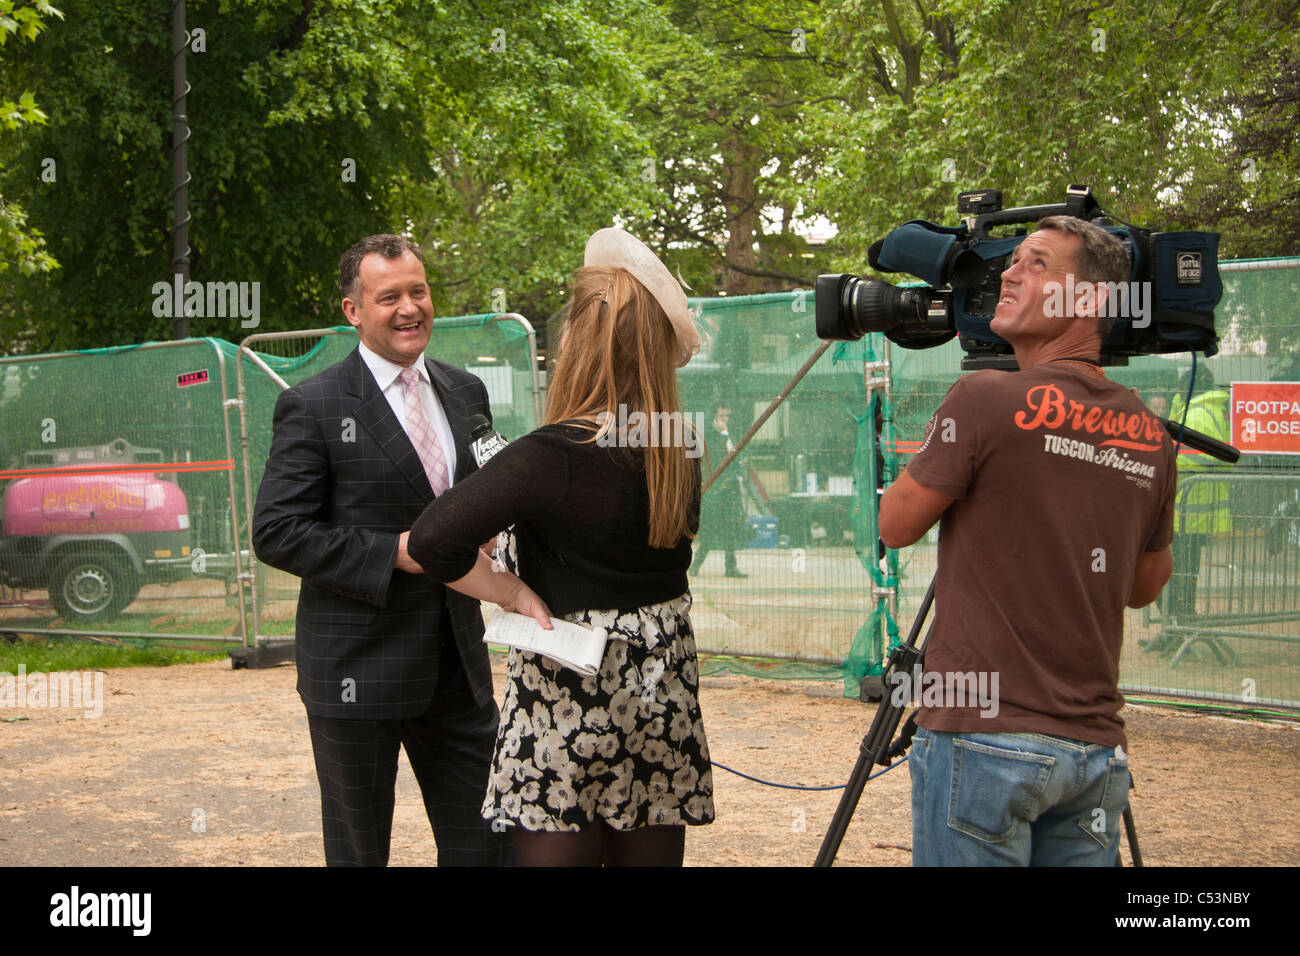 Paul Burrell being interviewed in the park during the Royal wedding celebration. Stock Photo